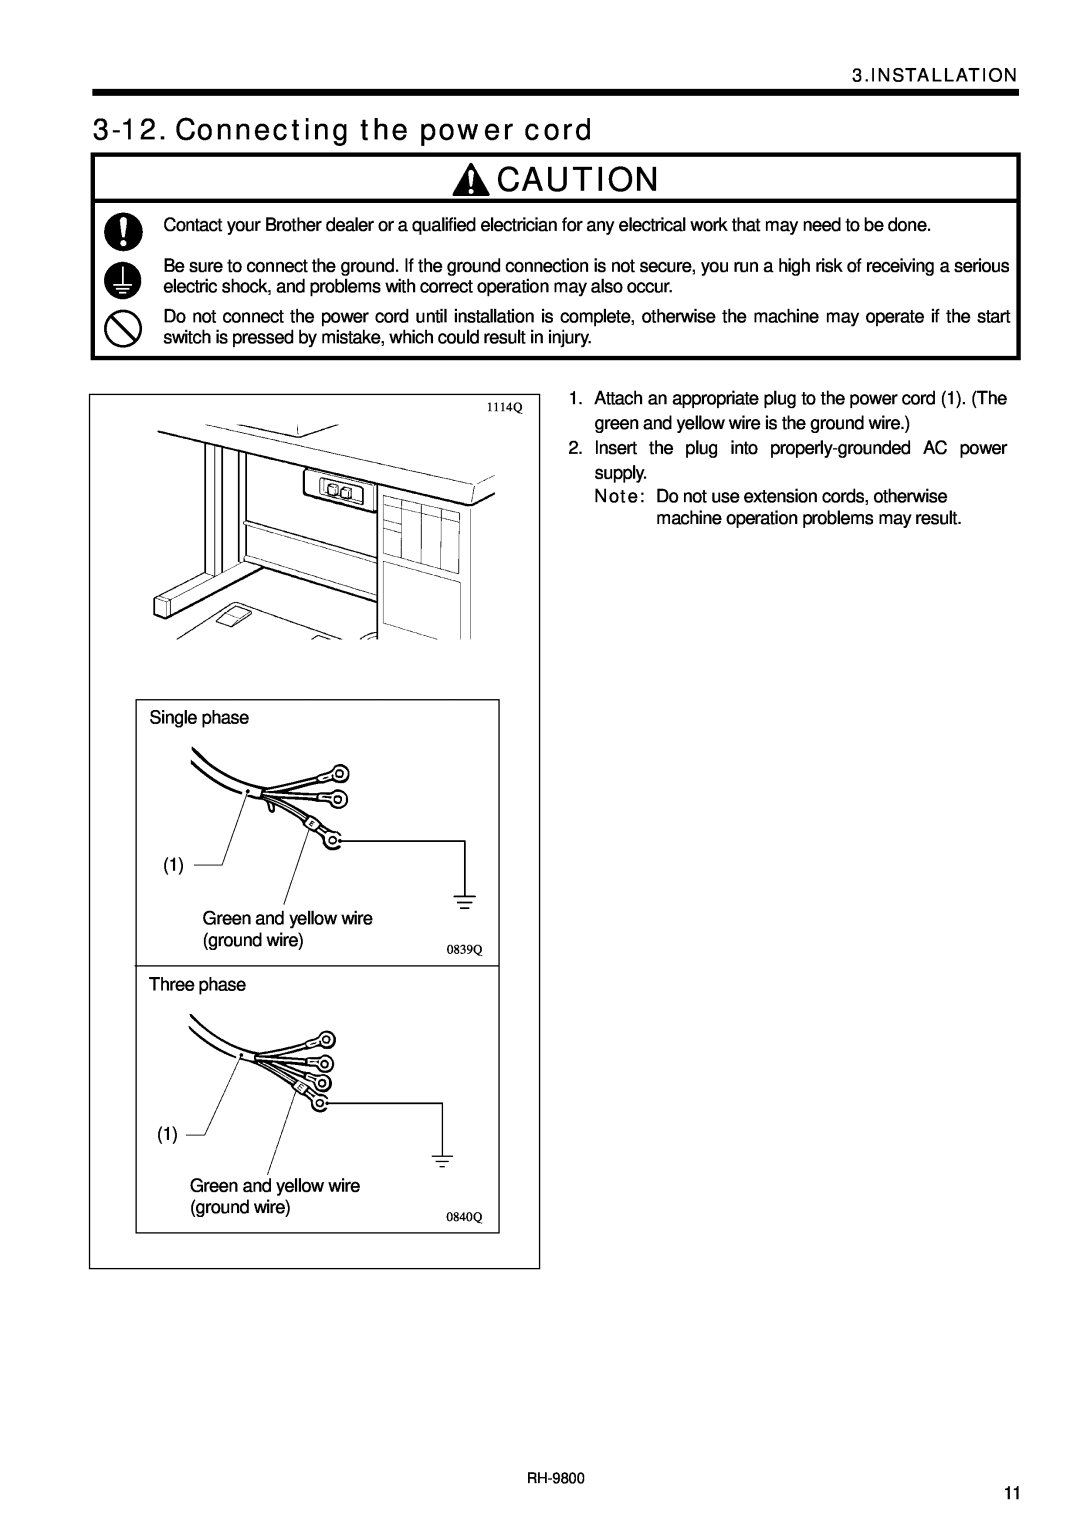 Brother DH4-B980 instruction manual Connecting the power cord, Installation, 1114Q, 0839Q, 0840Q 